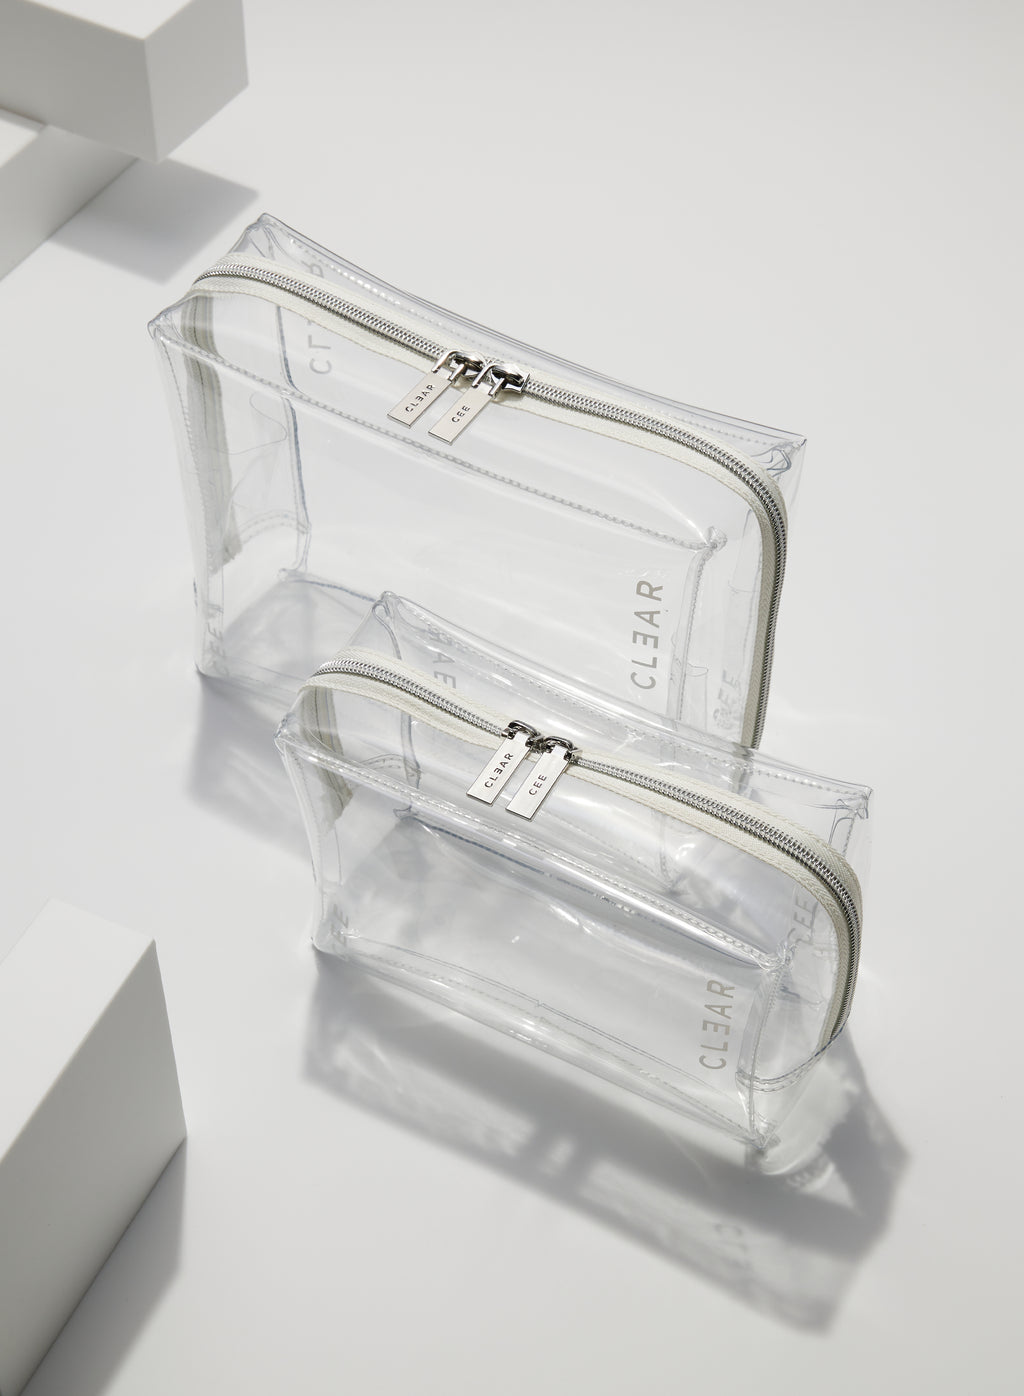 THE CLEAR COSMETIC CASE SET